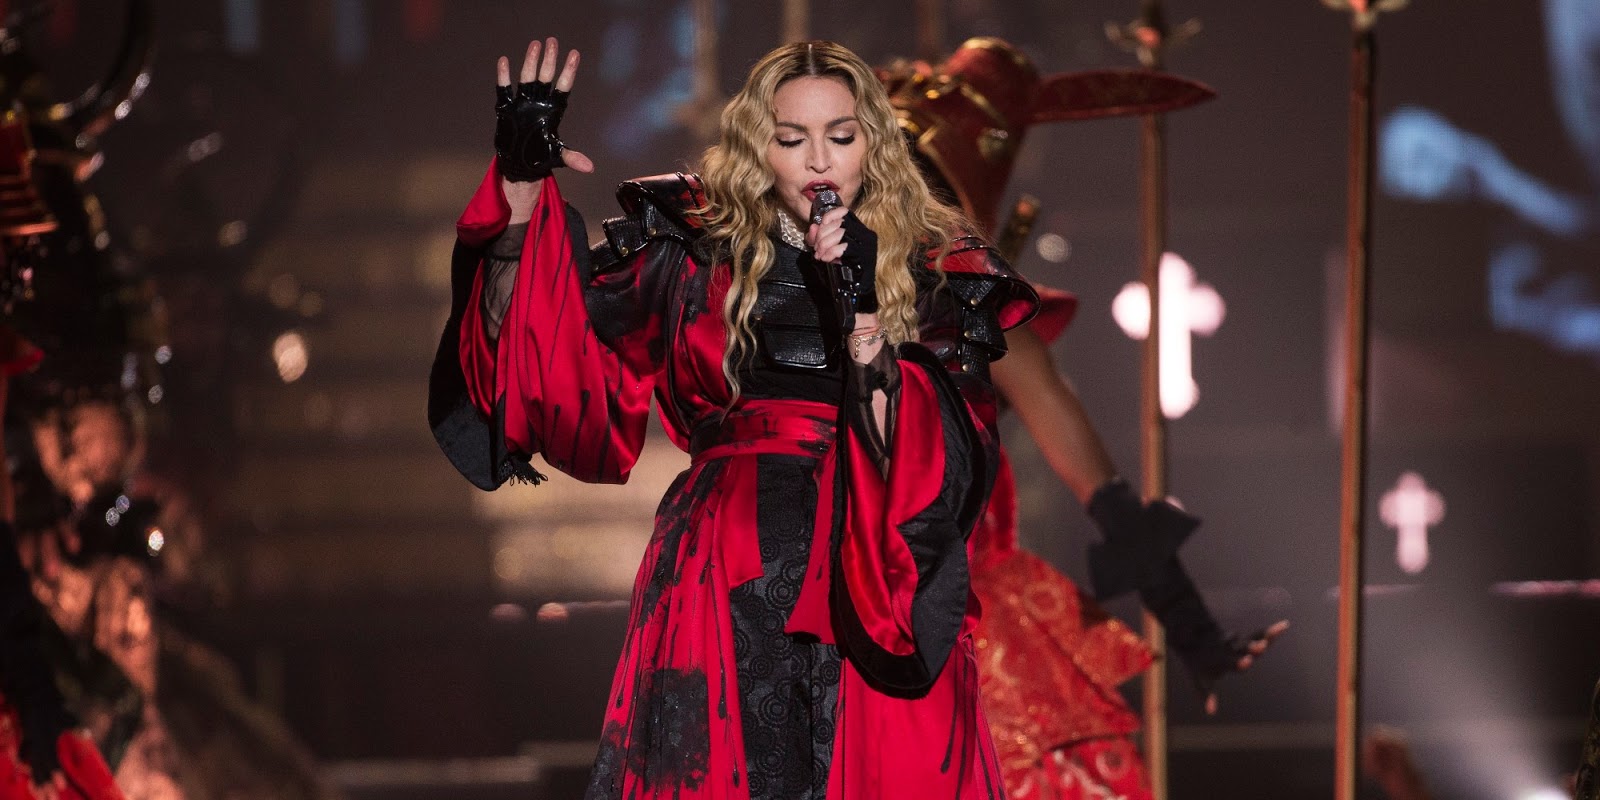 Eurovision 2019: Madonna set to perform two songs